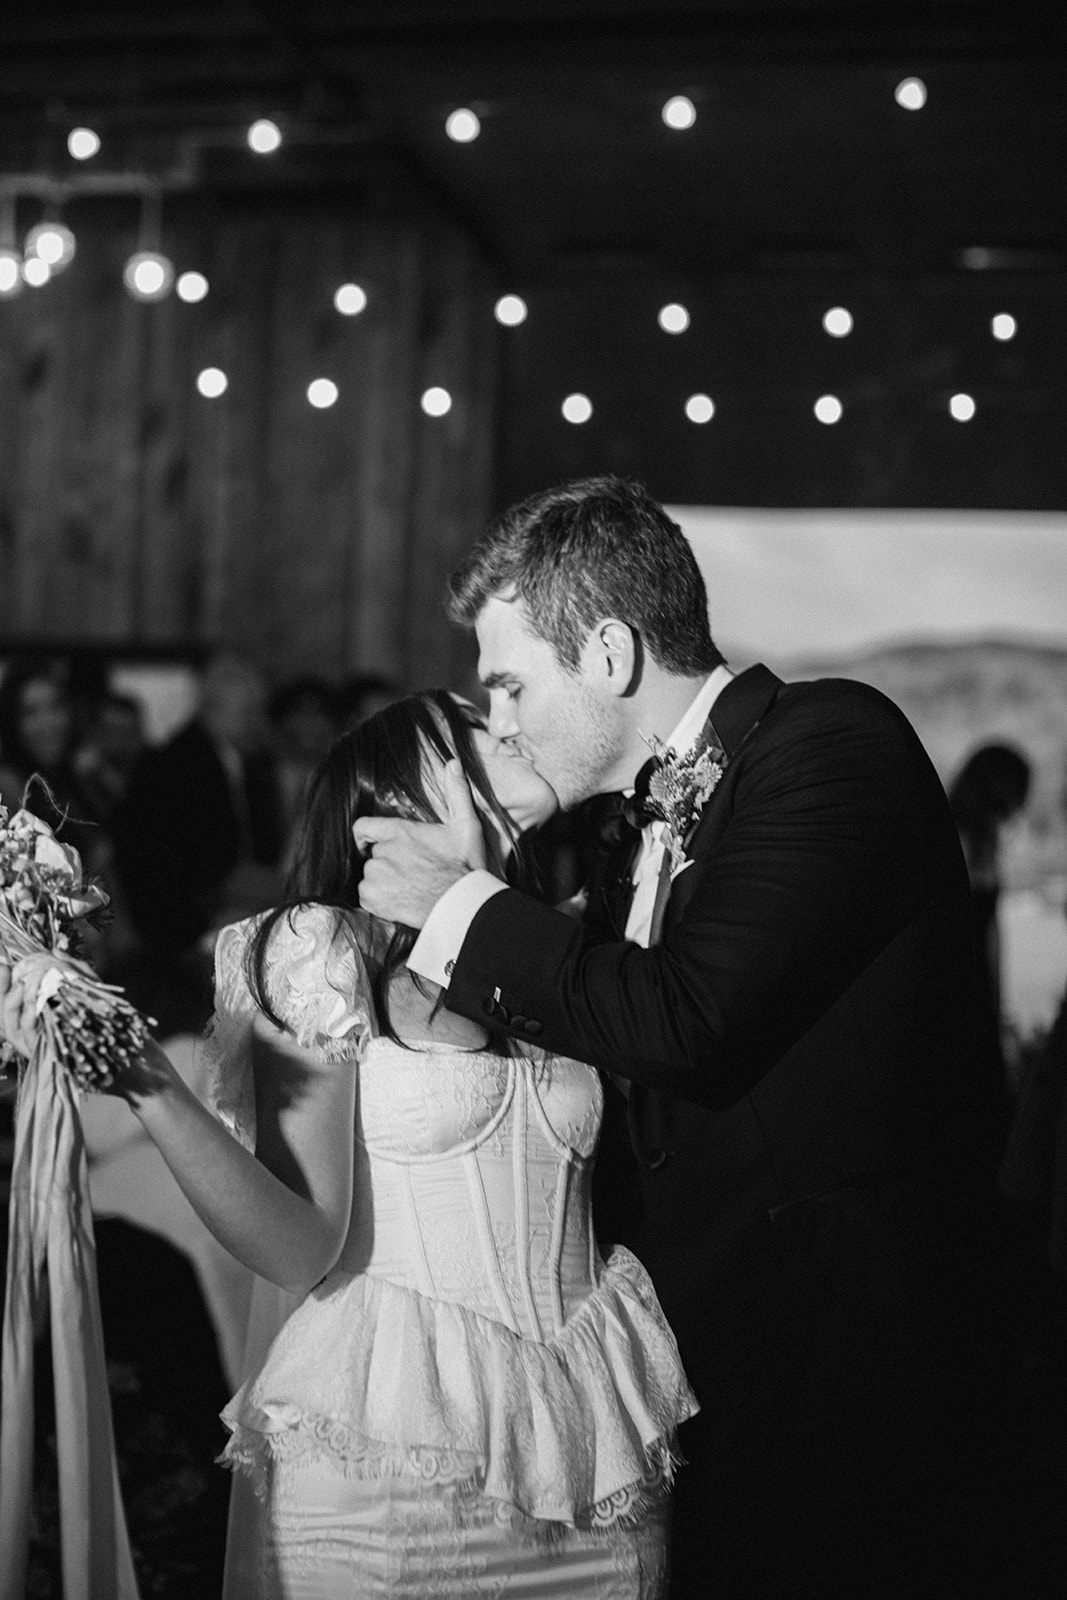 the bride and groom kiss as they walk down the aisle together at their blue sky ranch destination wedding in utah. photo taken by megan robinson photography